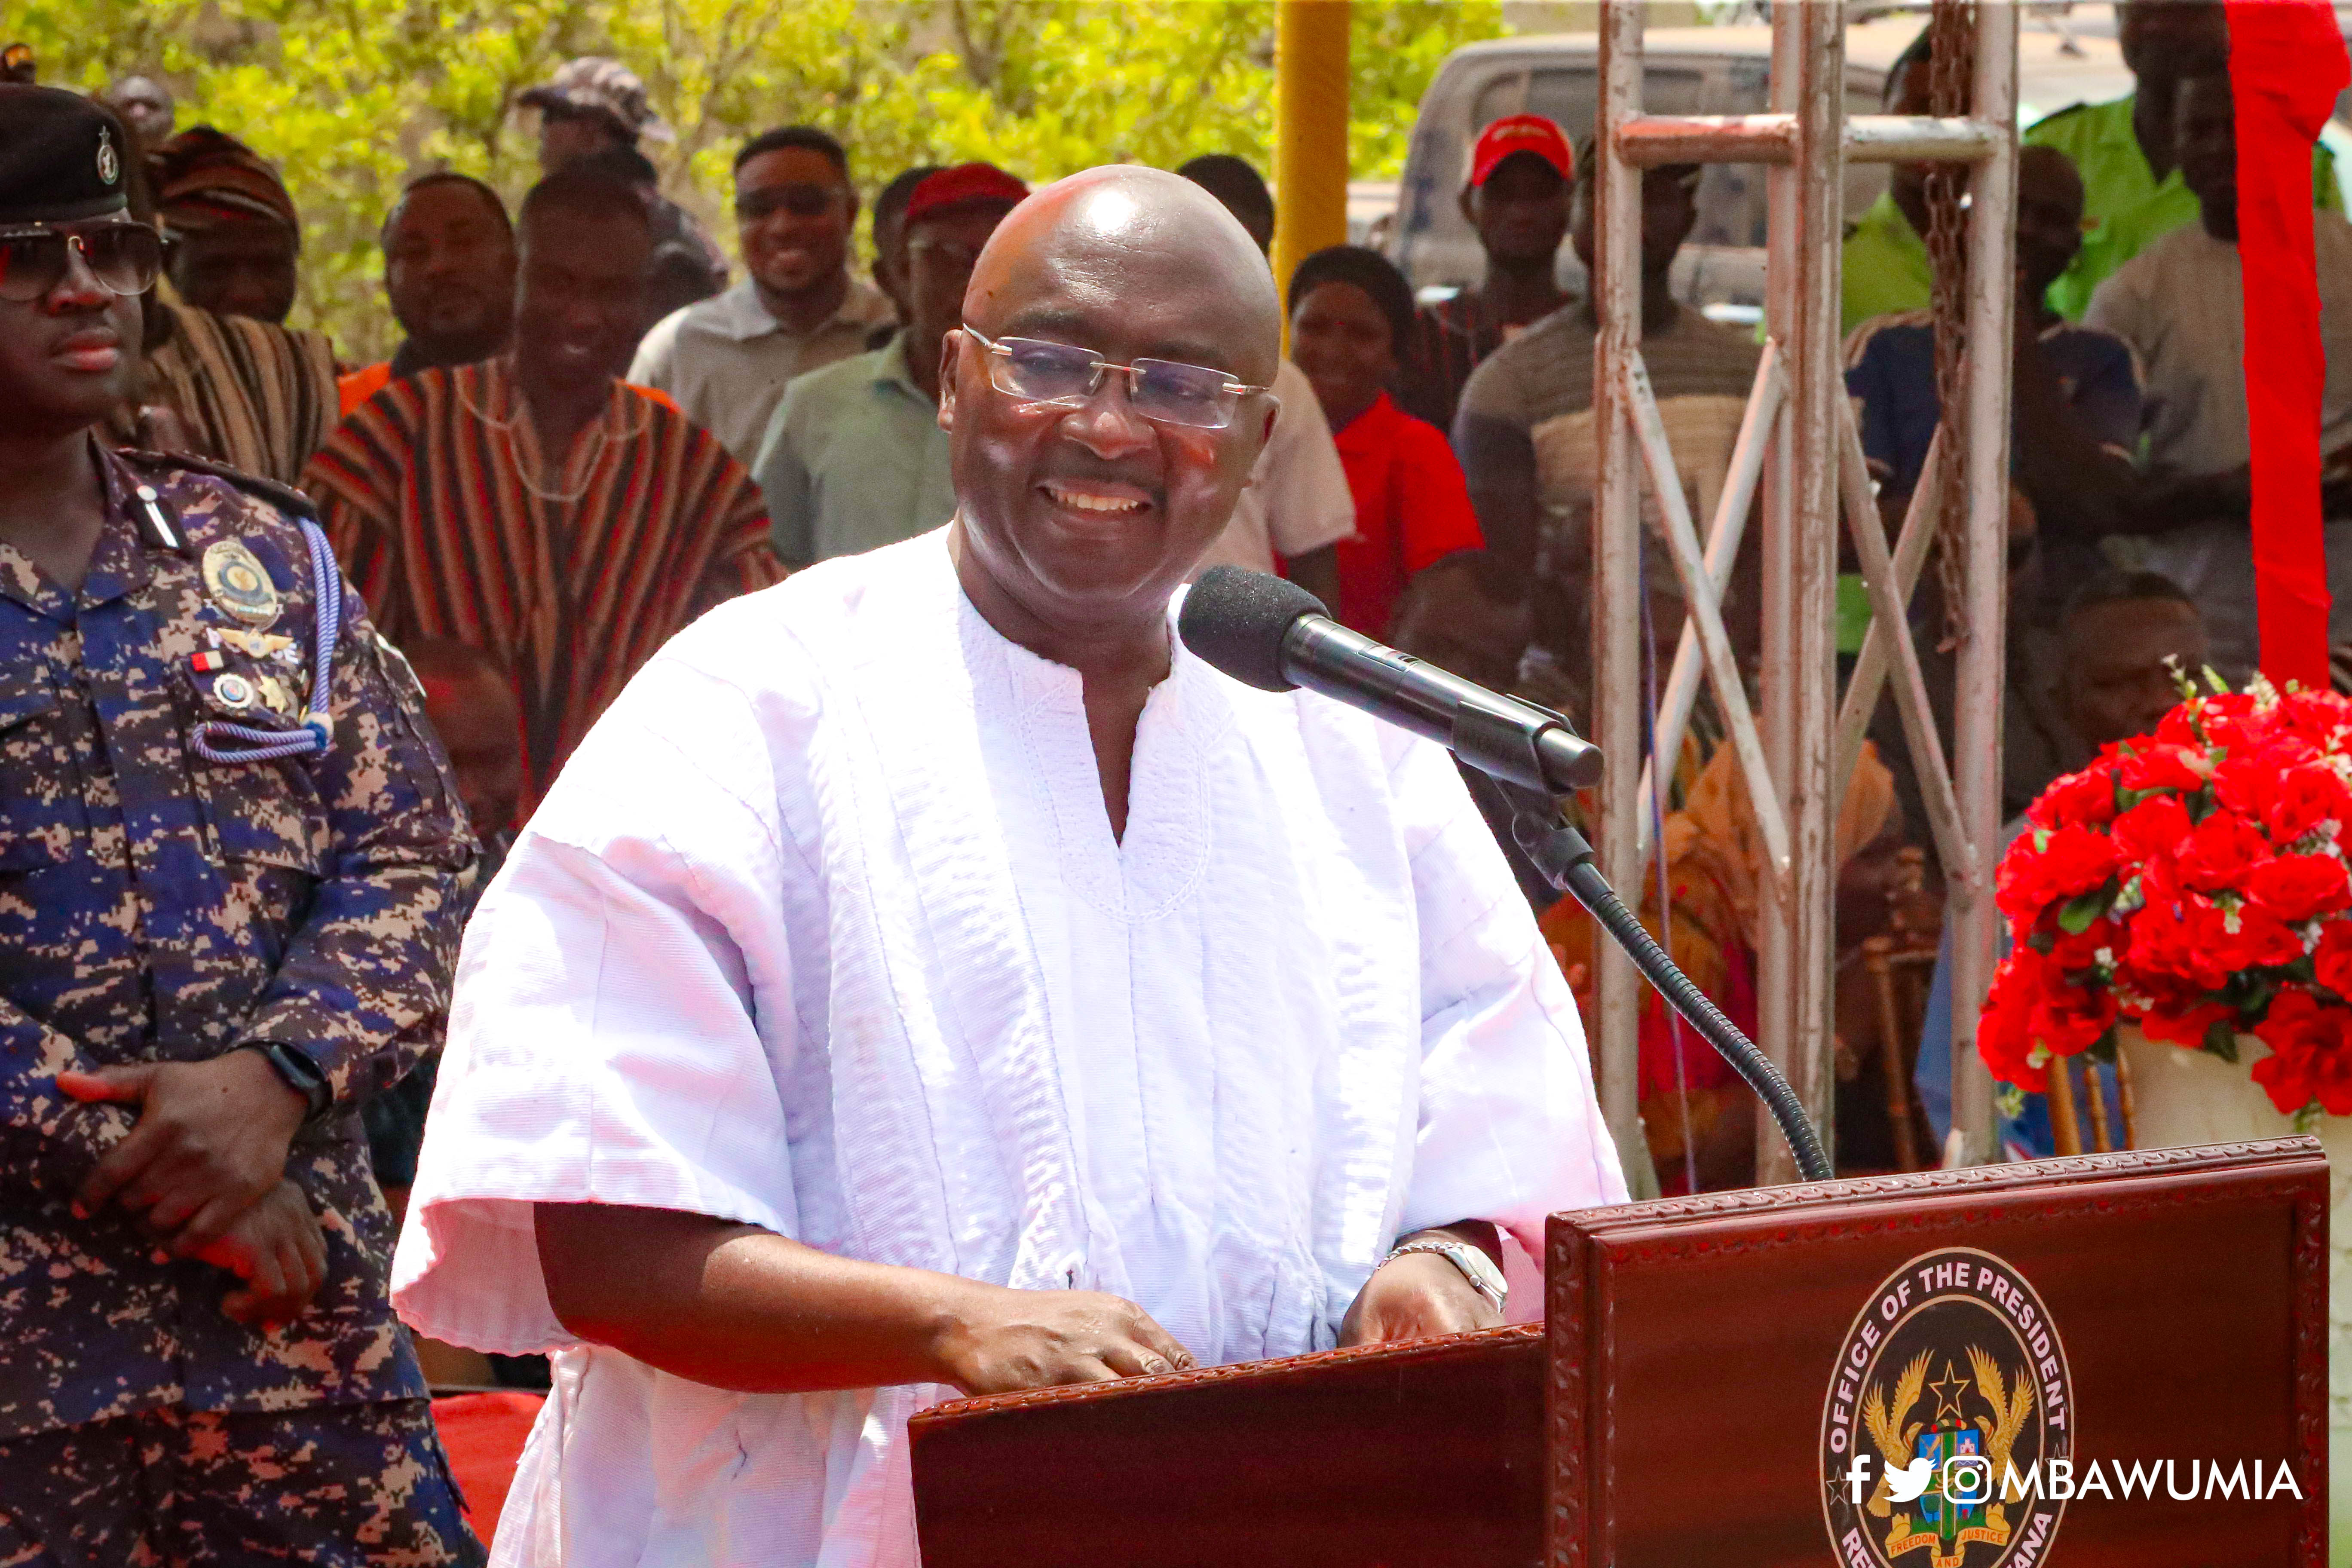 The banking sector reform is the cause of Ghana’s current  economic woes - Dr. Bawumia